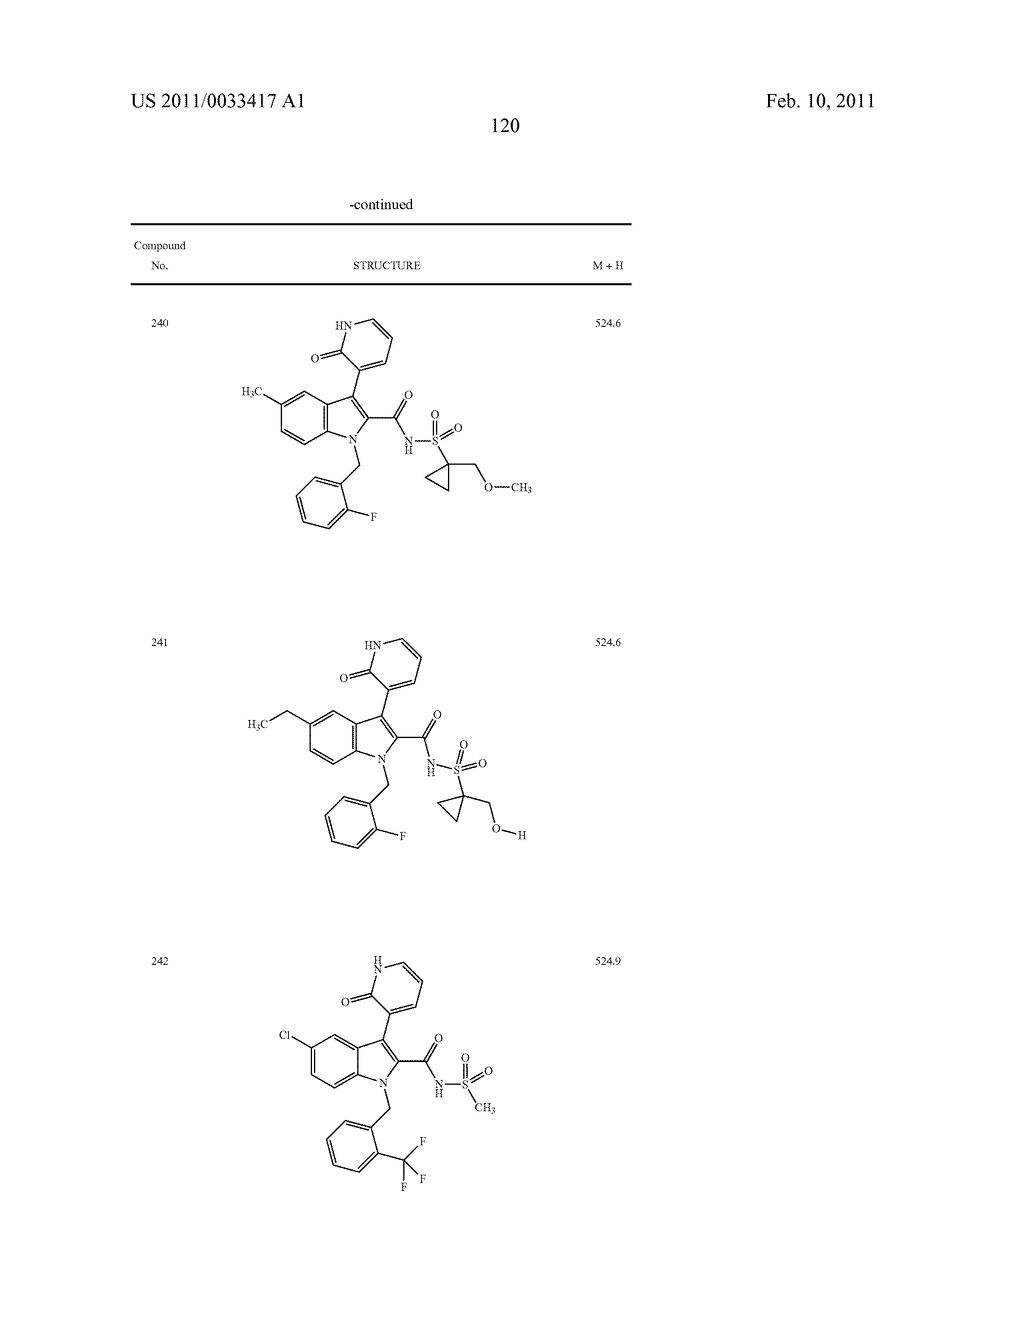 2,3-SUBSTITUTED INDOLE DERIVATIVES FOR TREATING VIRAL INFECTIONS - diagram, schematic, and image 121